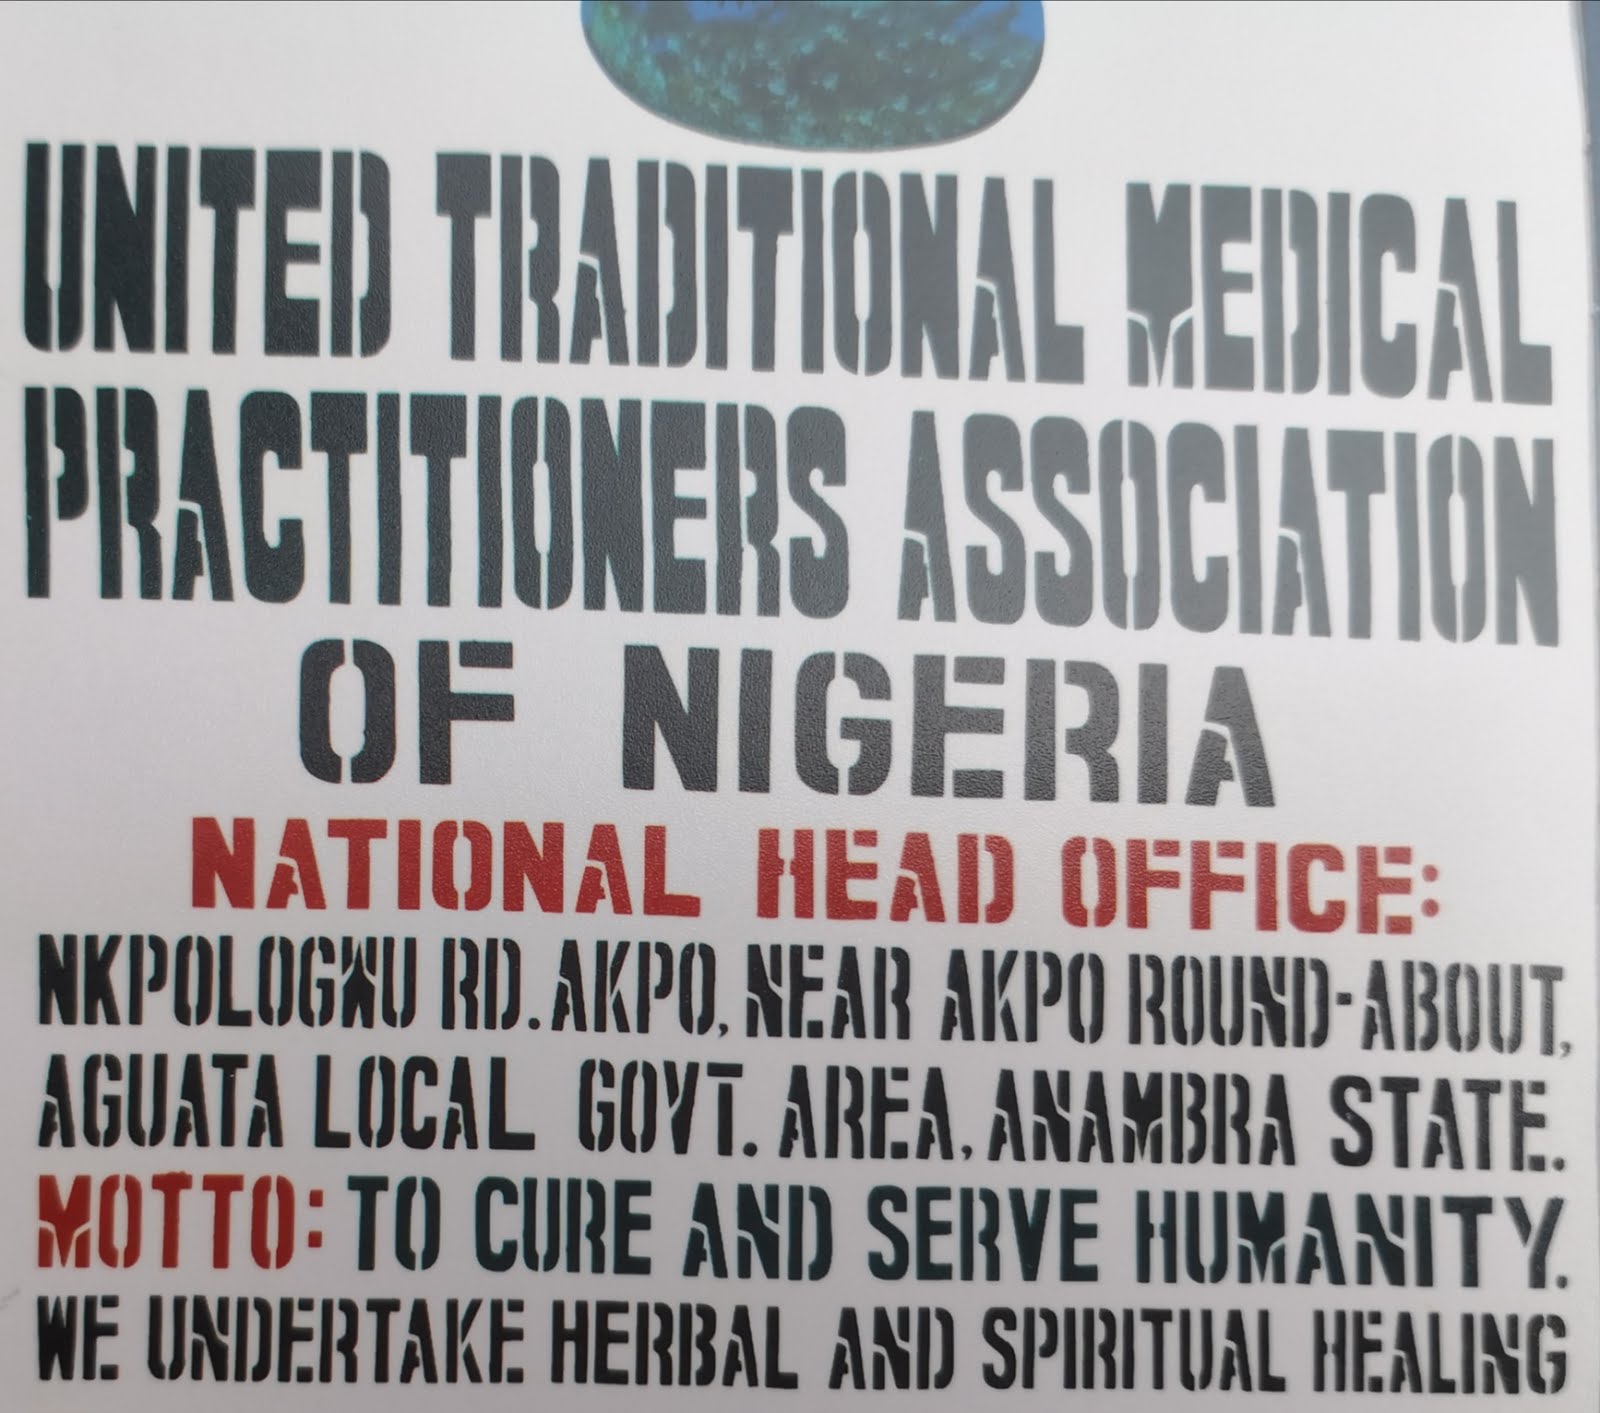 UNITED TRADITIONAL MEDICAL PRACTITIONERS ASSOCIATION